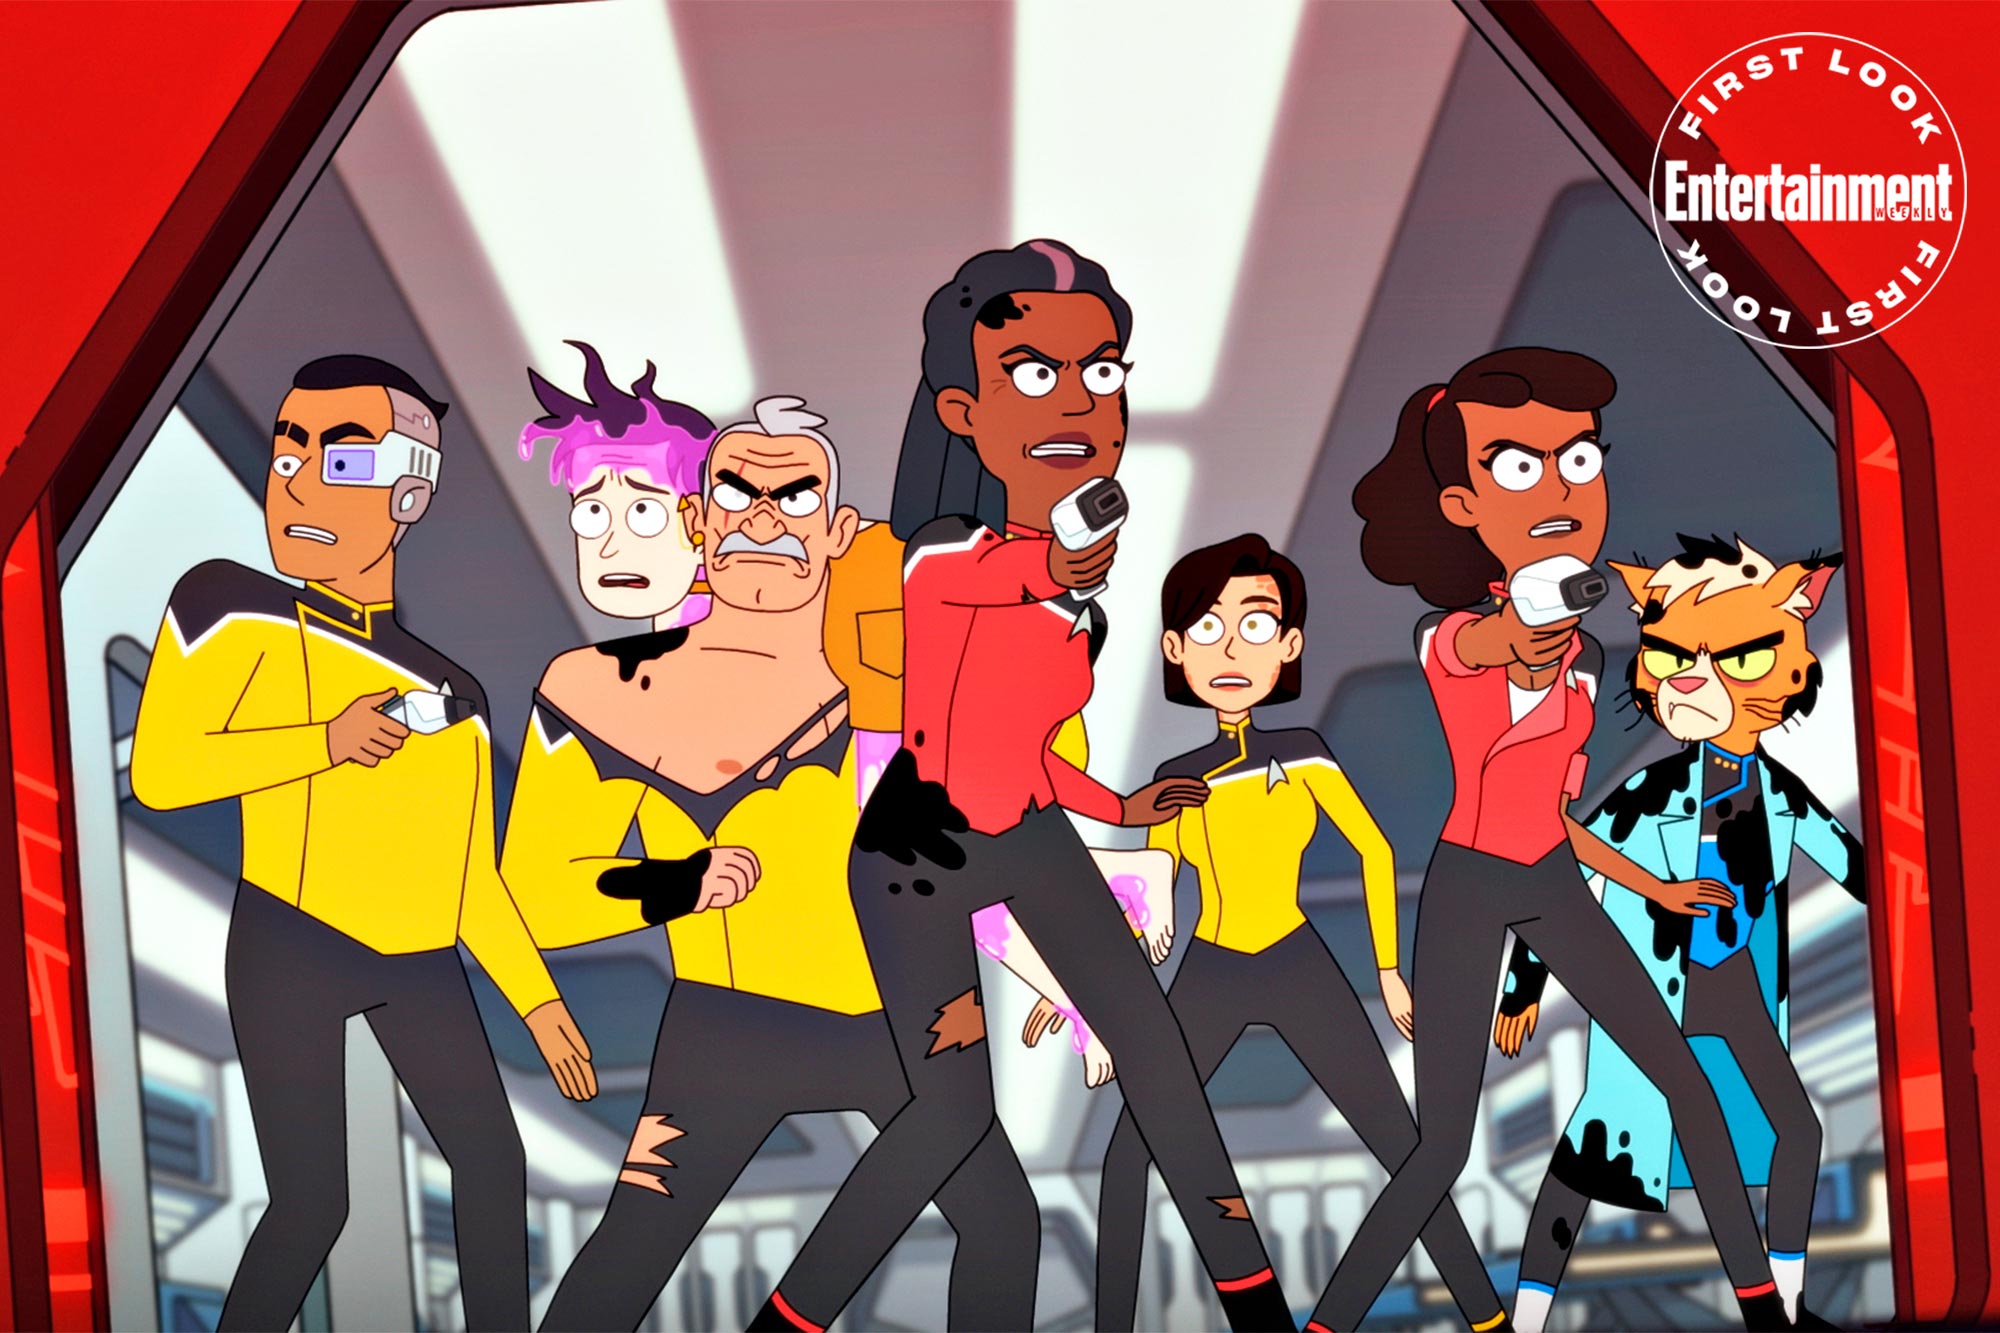 Star Trek: Lower Decks might include favorite The Next Generation characters